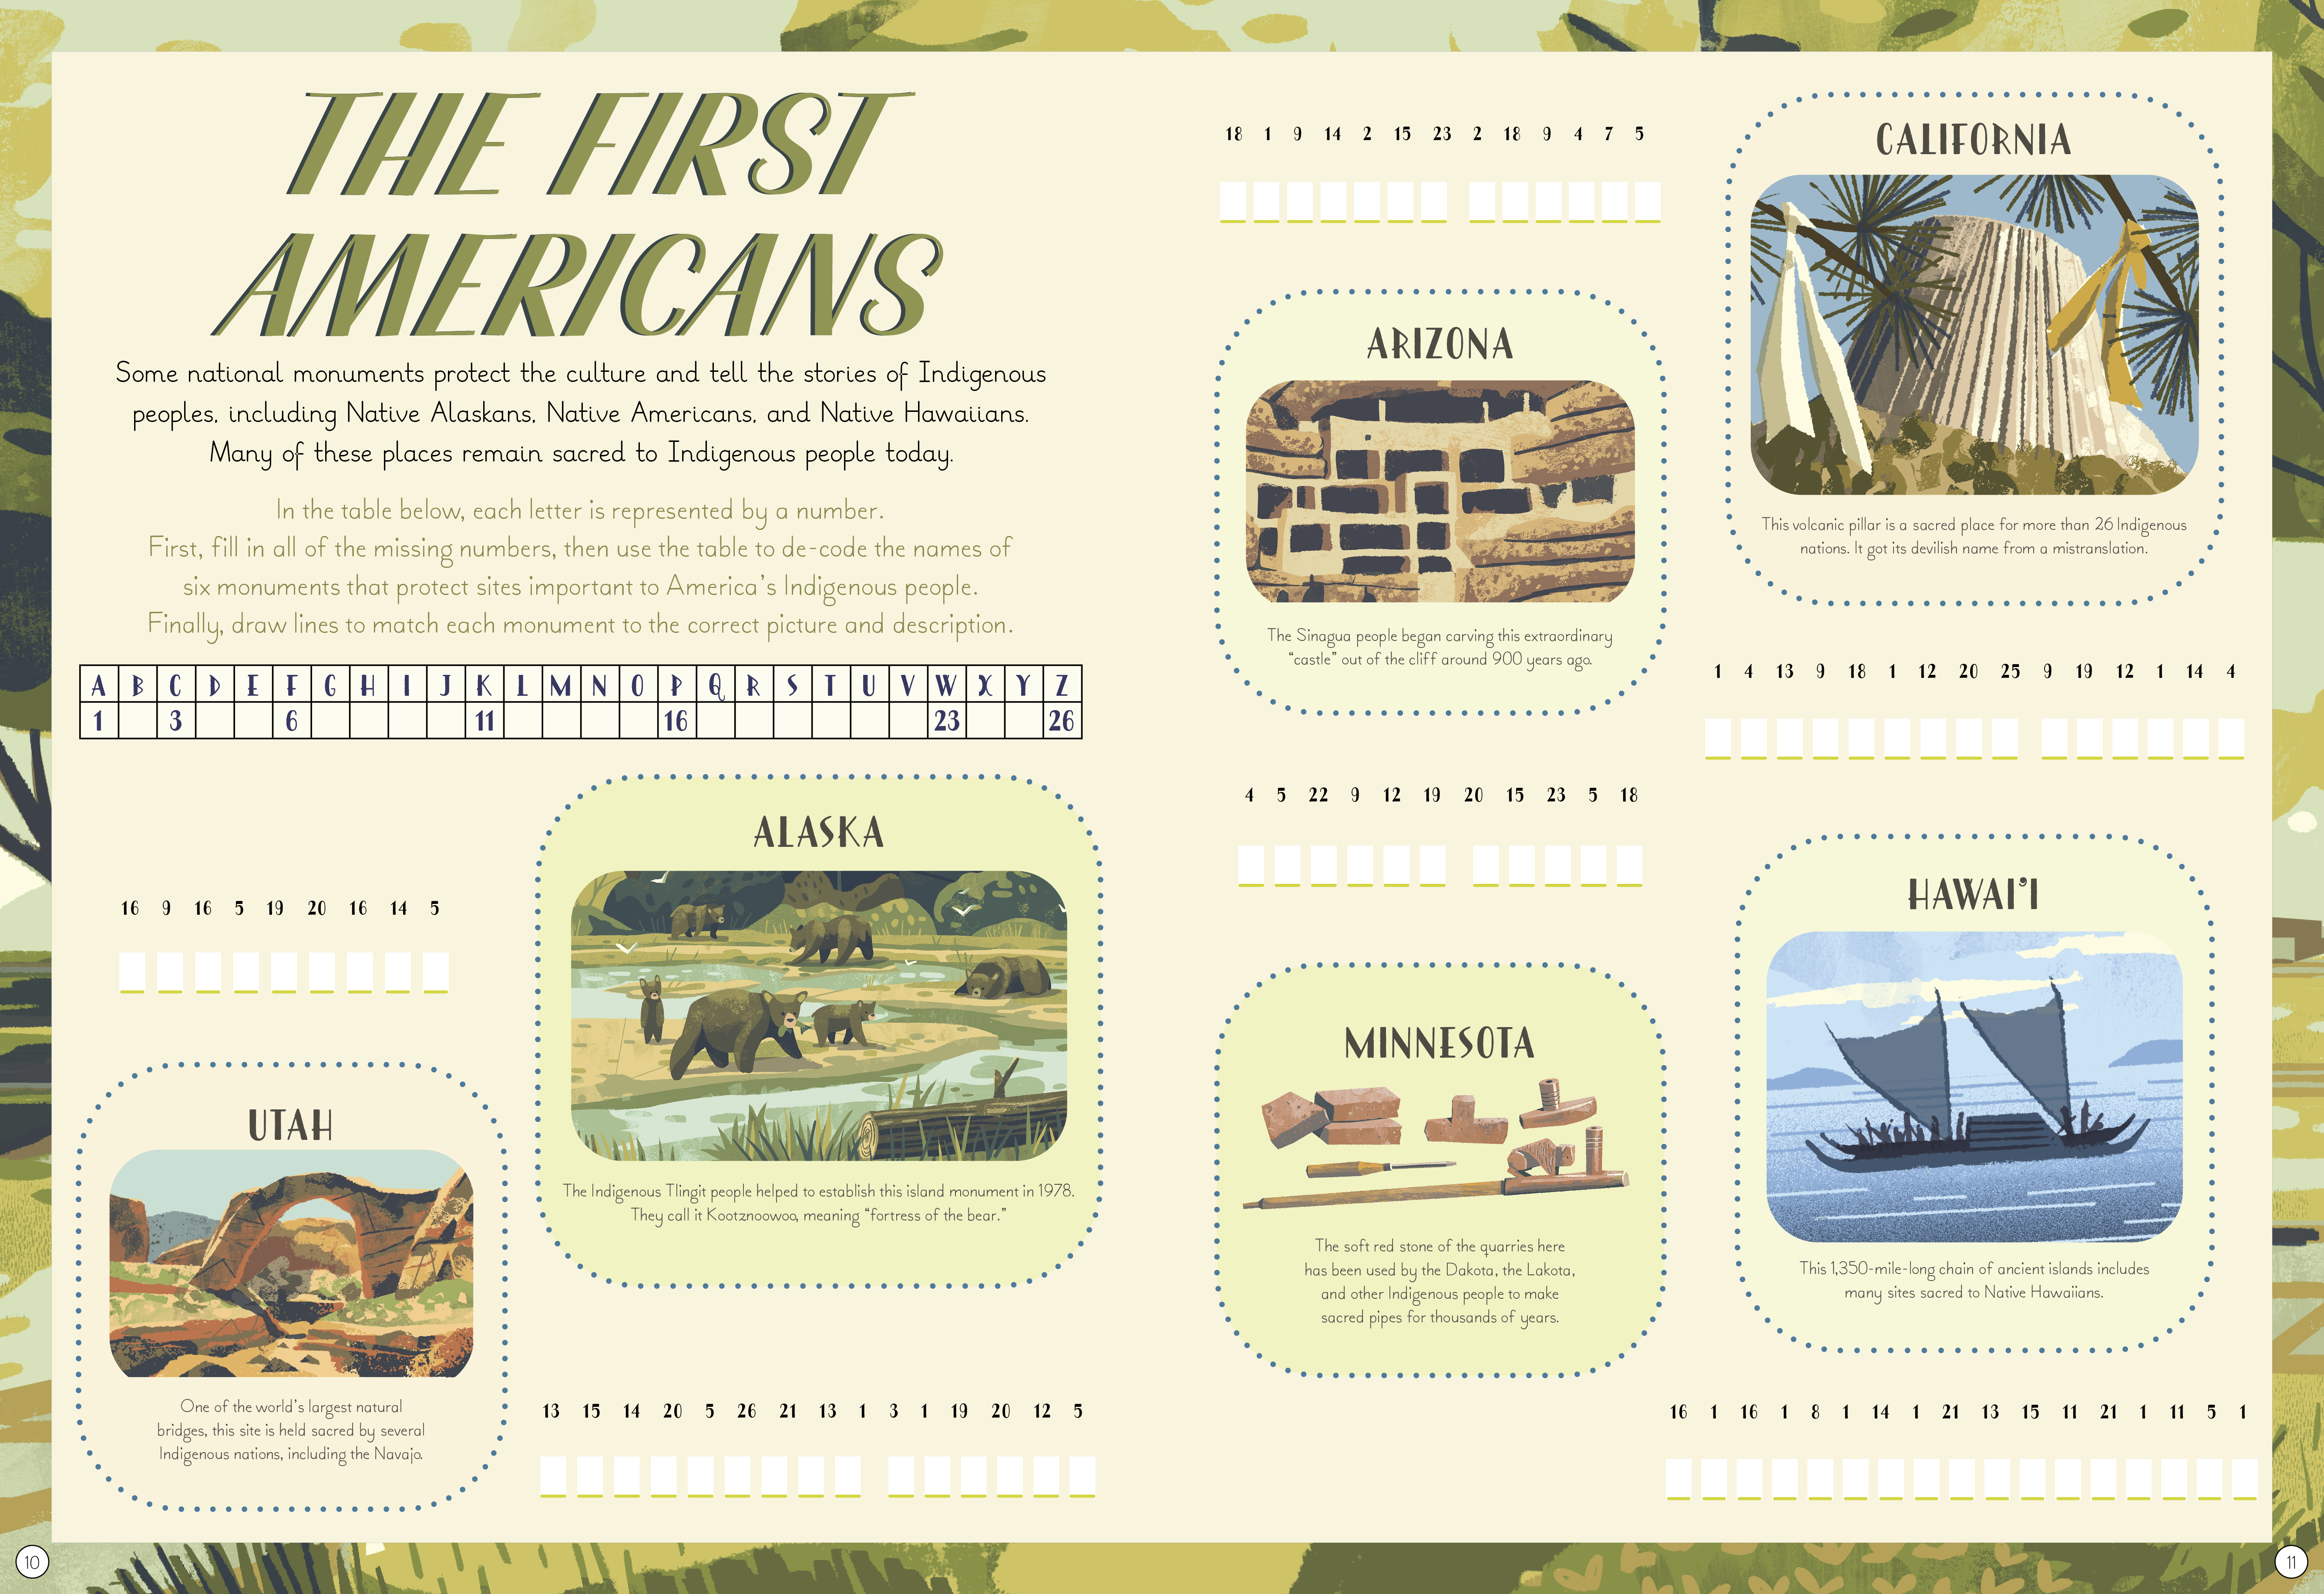 National Monuments of the USA Activity Book